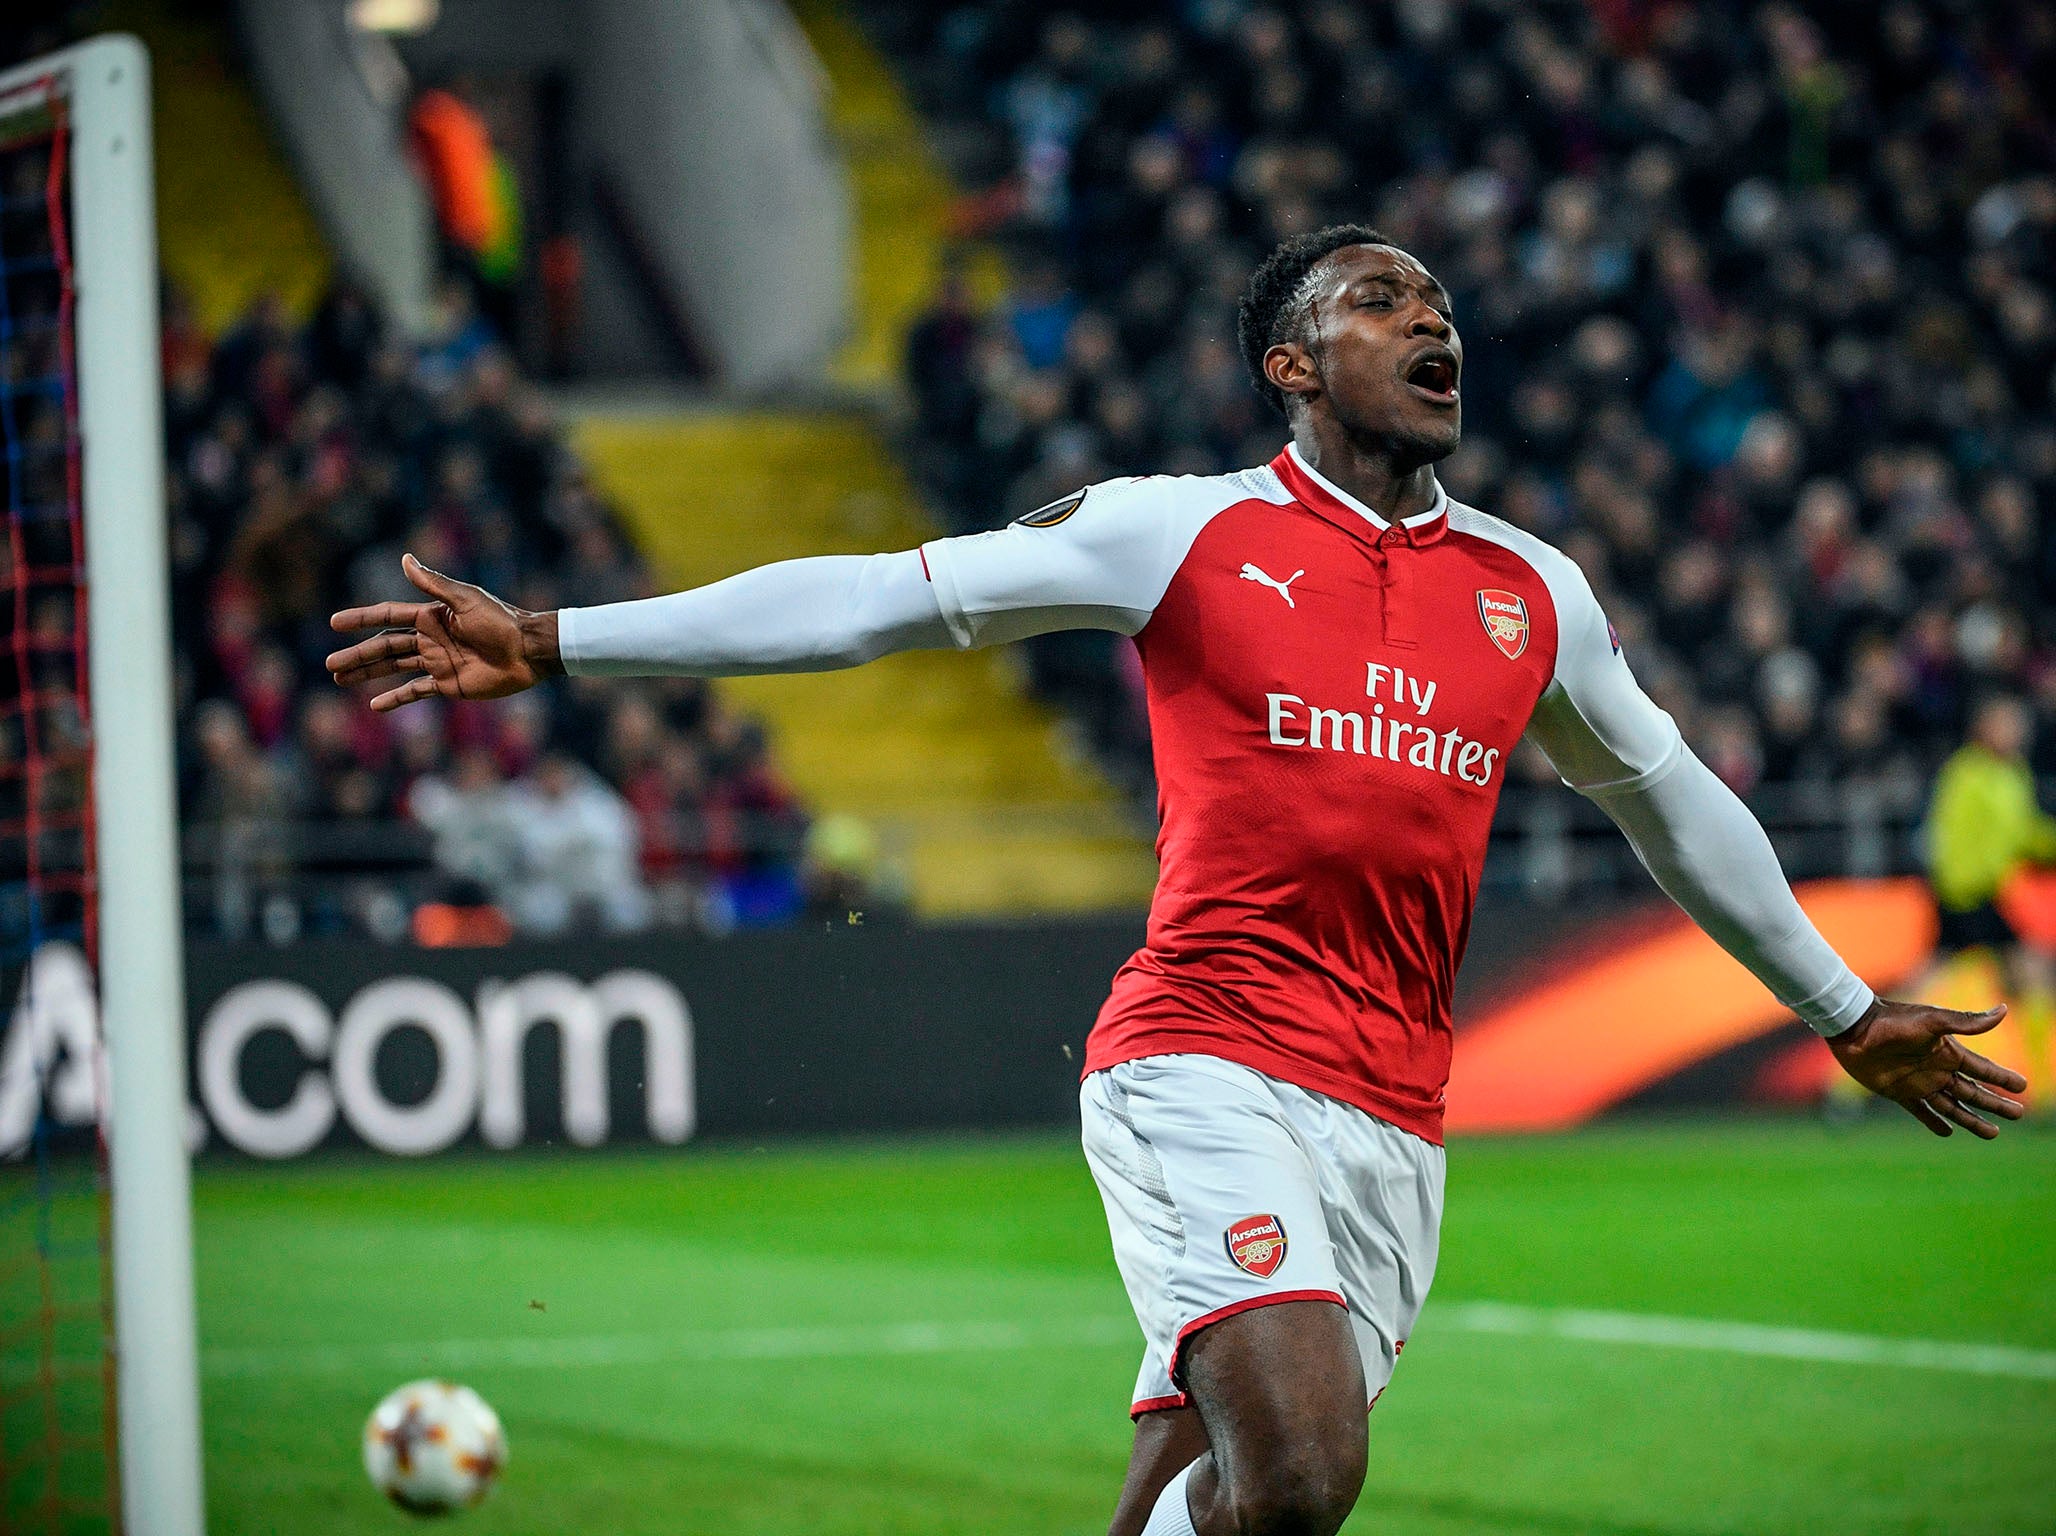 Danny Welbeck helped Arsenal beat CSKA Moscow to reach the semi-finals